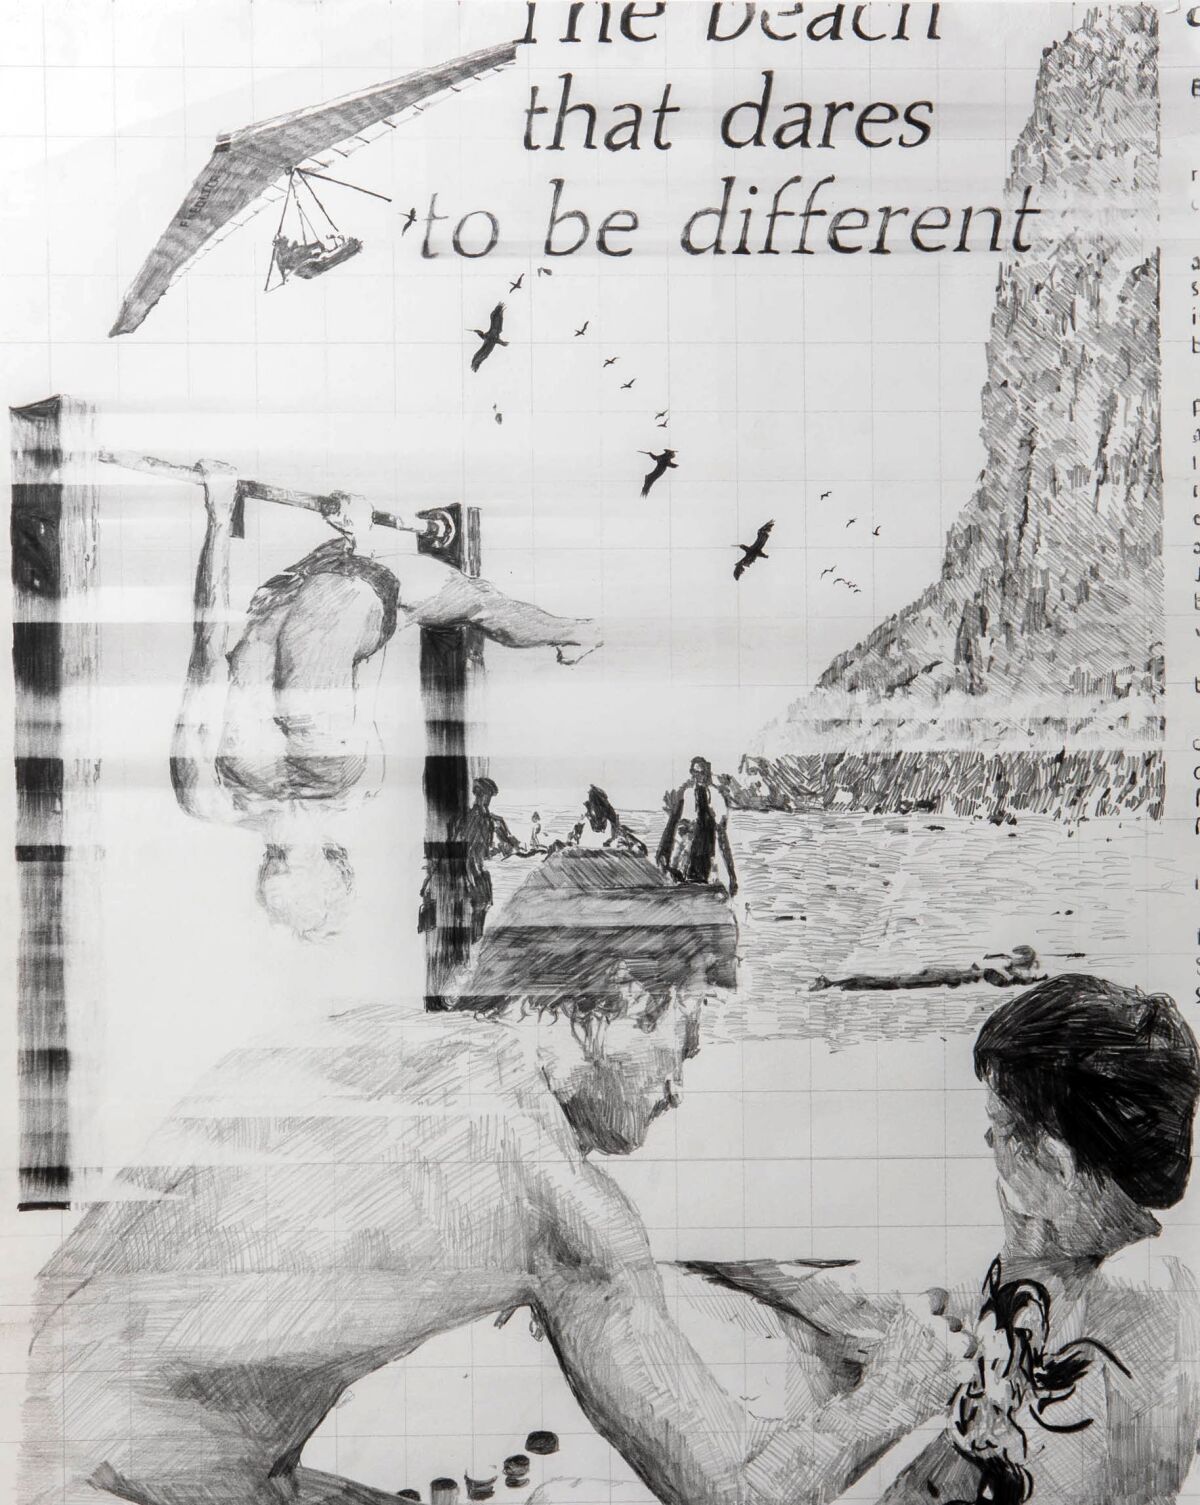 "The Beach That Dares to be Different" is a graphite-on-paper work by Joshua Moreno.